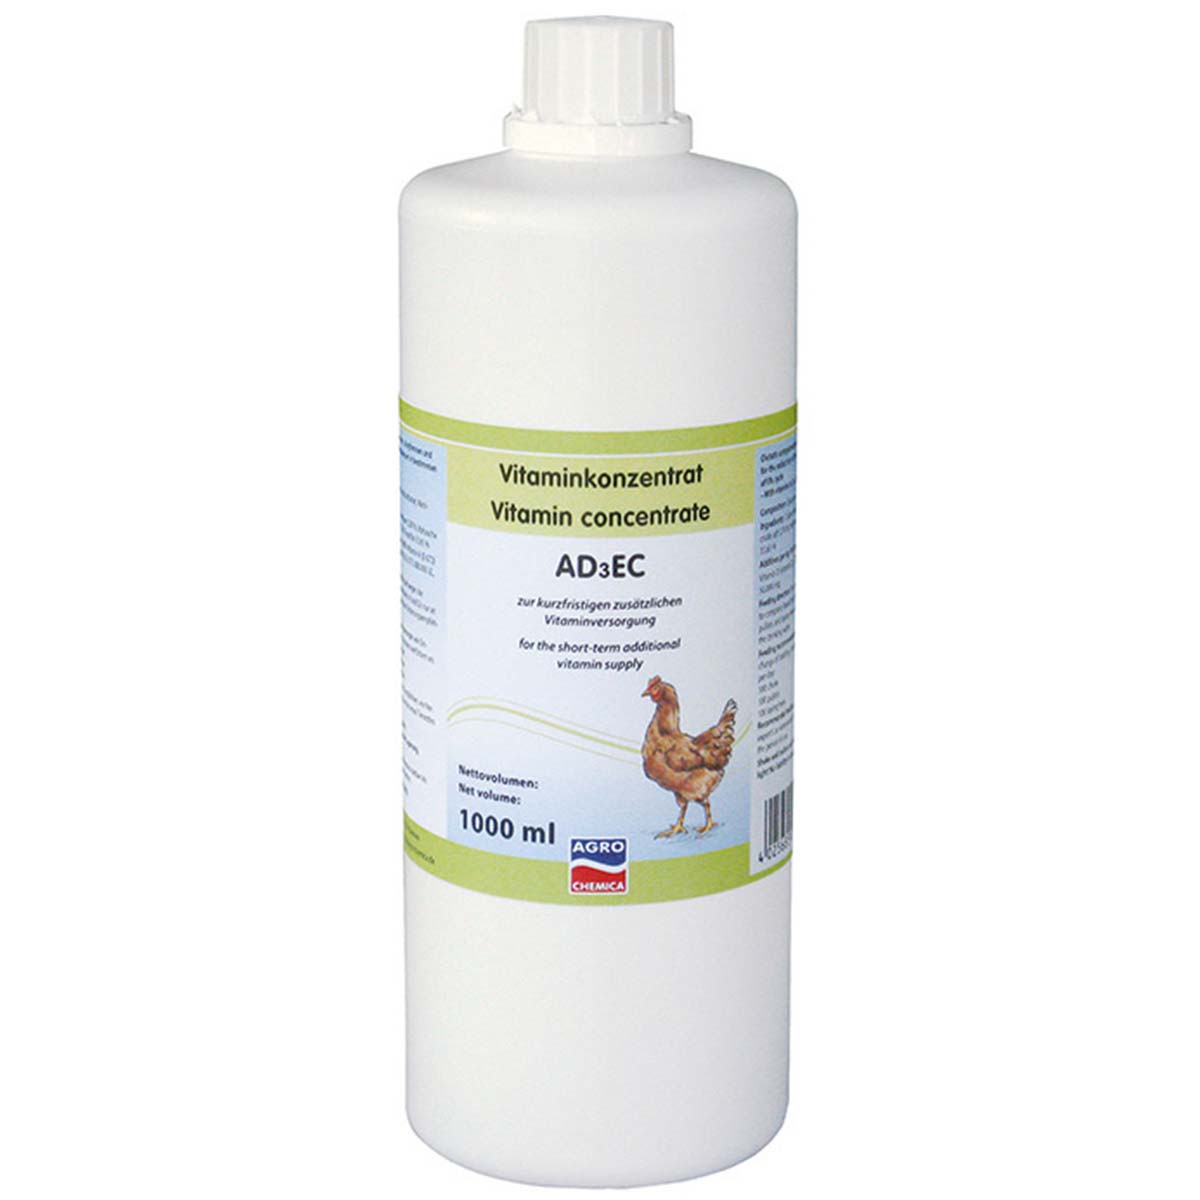 Vitamin-concentrate AD3EC poultry 1000 ml